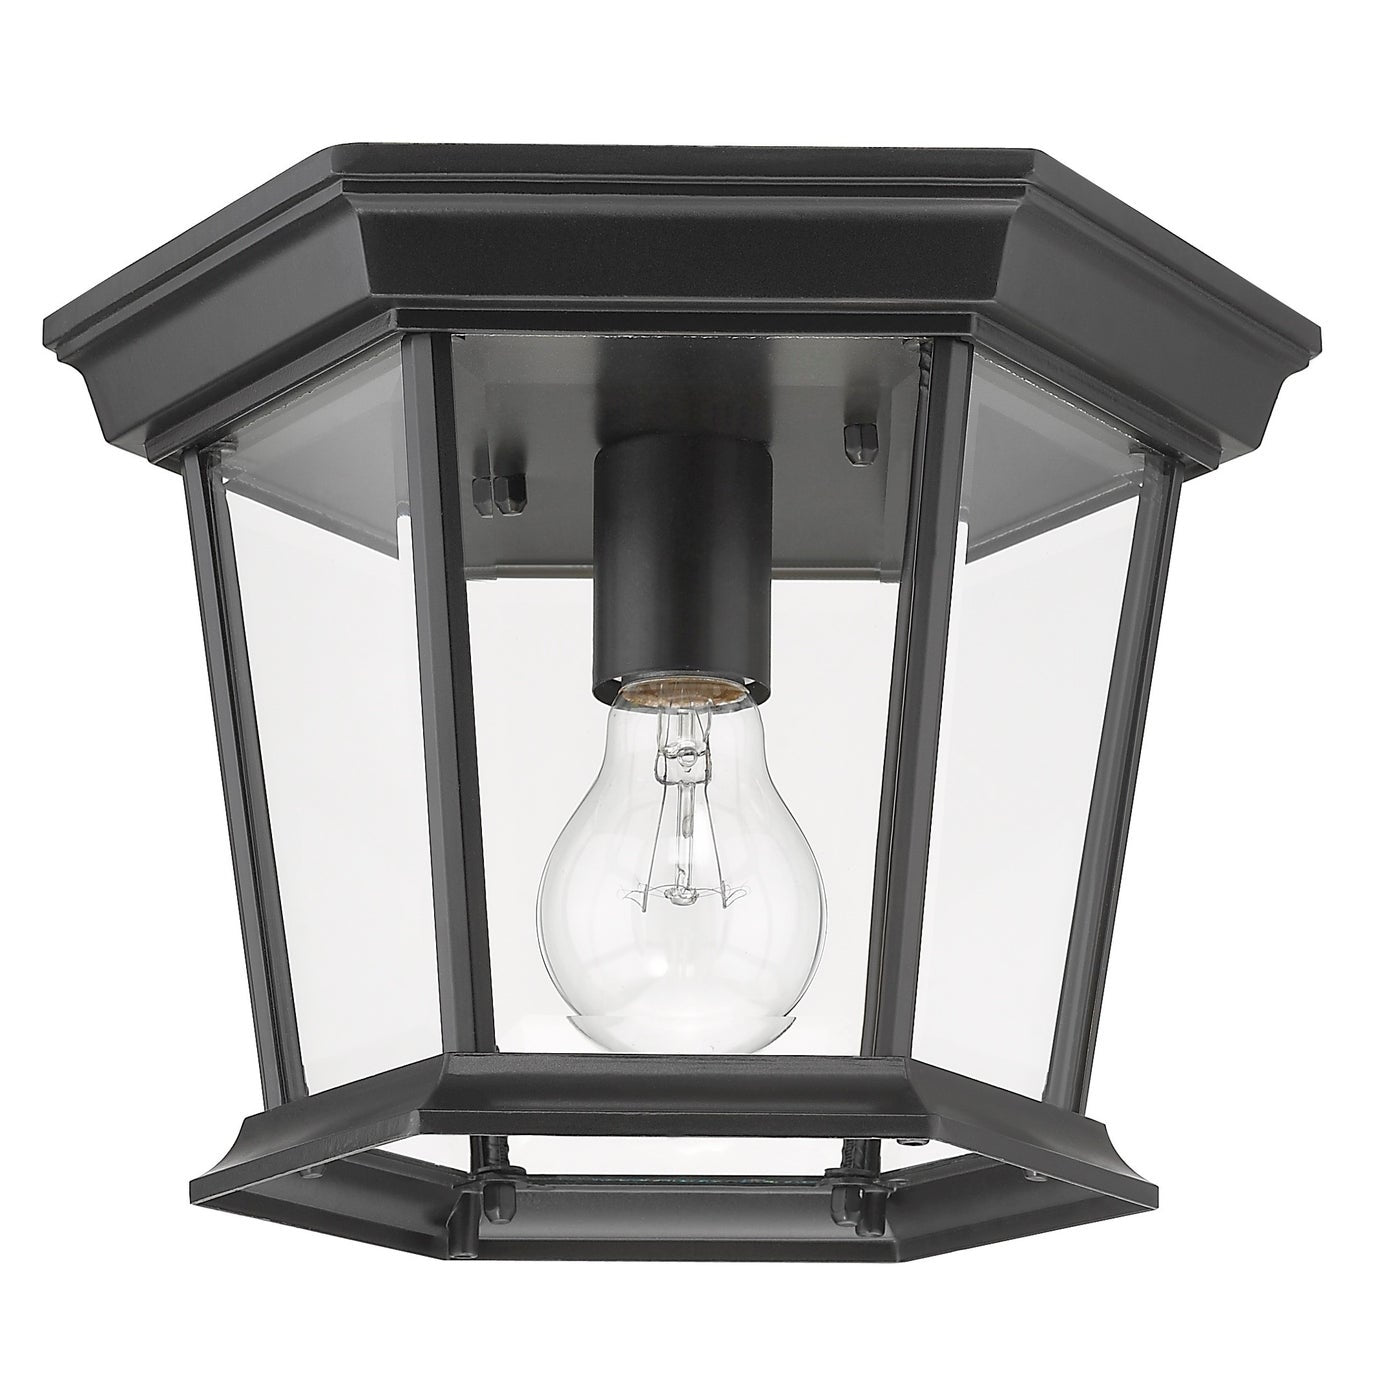 Farmhouse outdoor ceiling light with black metal fixture and clear glass. Complements country décor. UL Listed for wet locations. 11"W x 7.5"H.